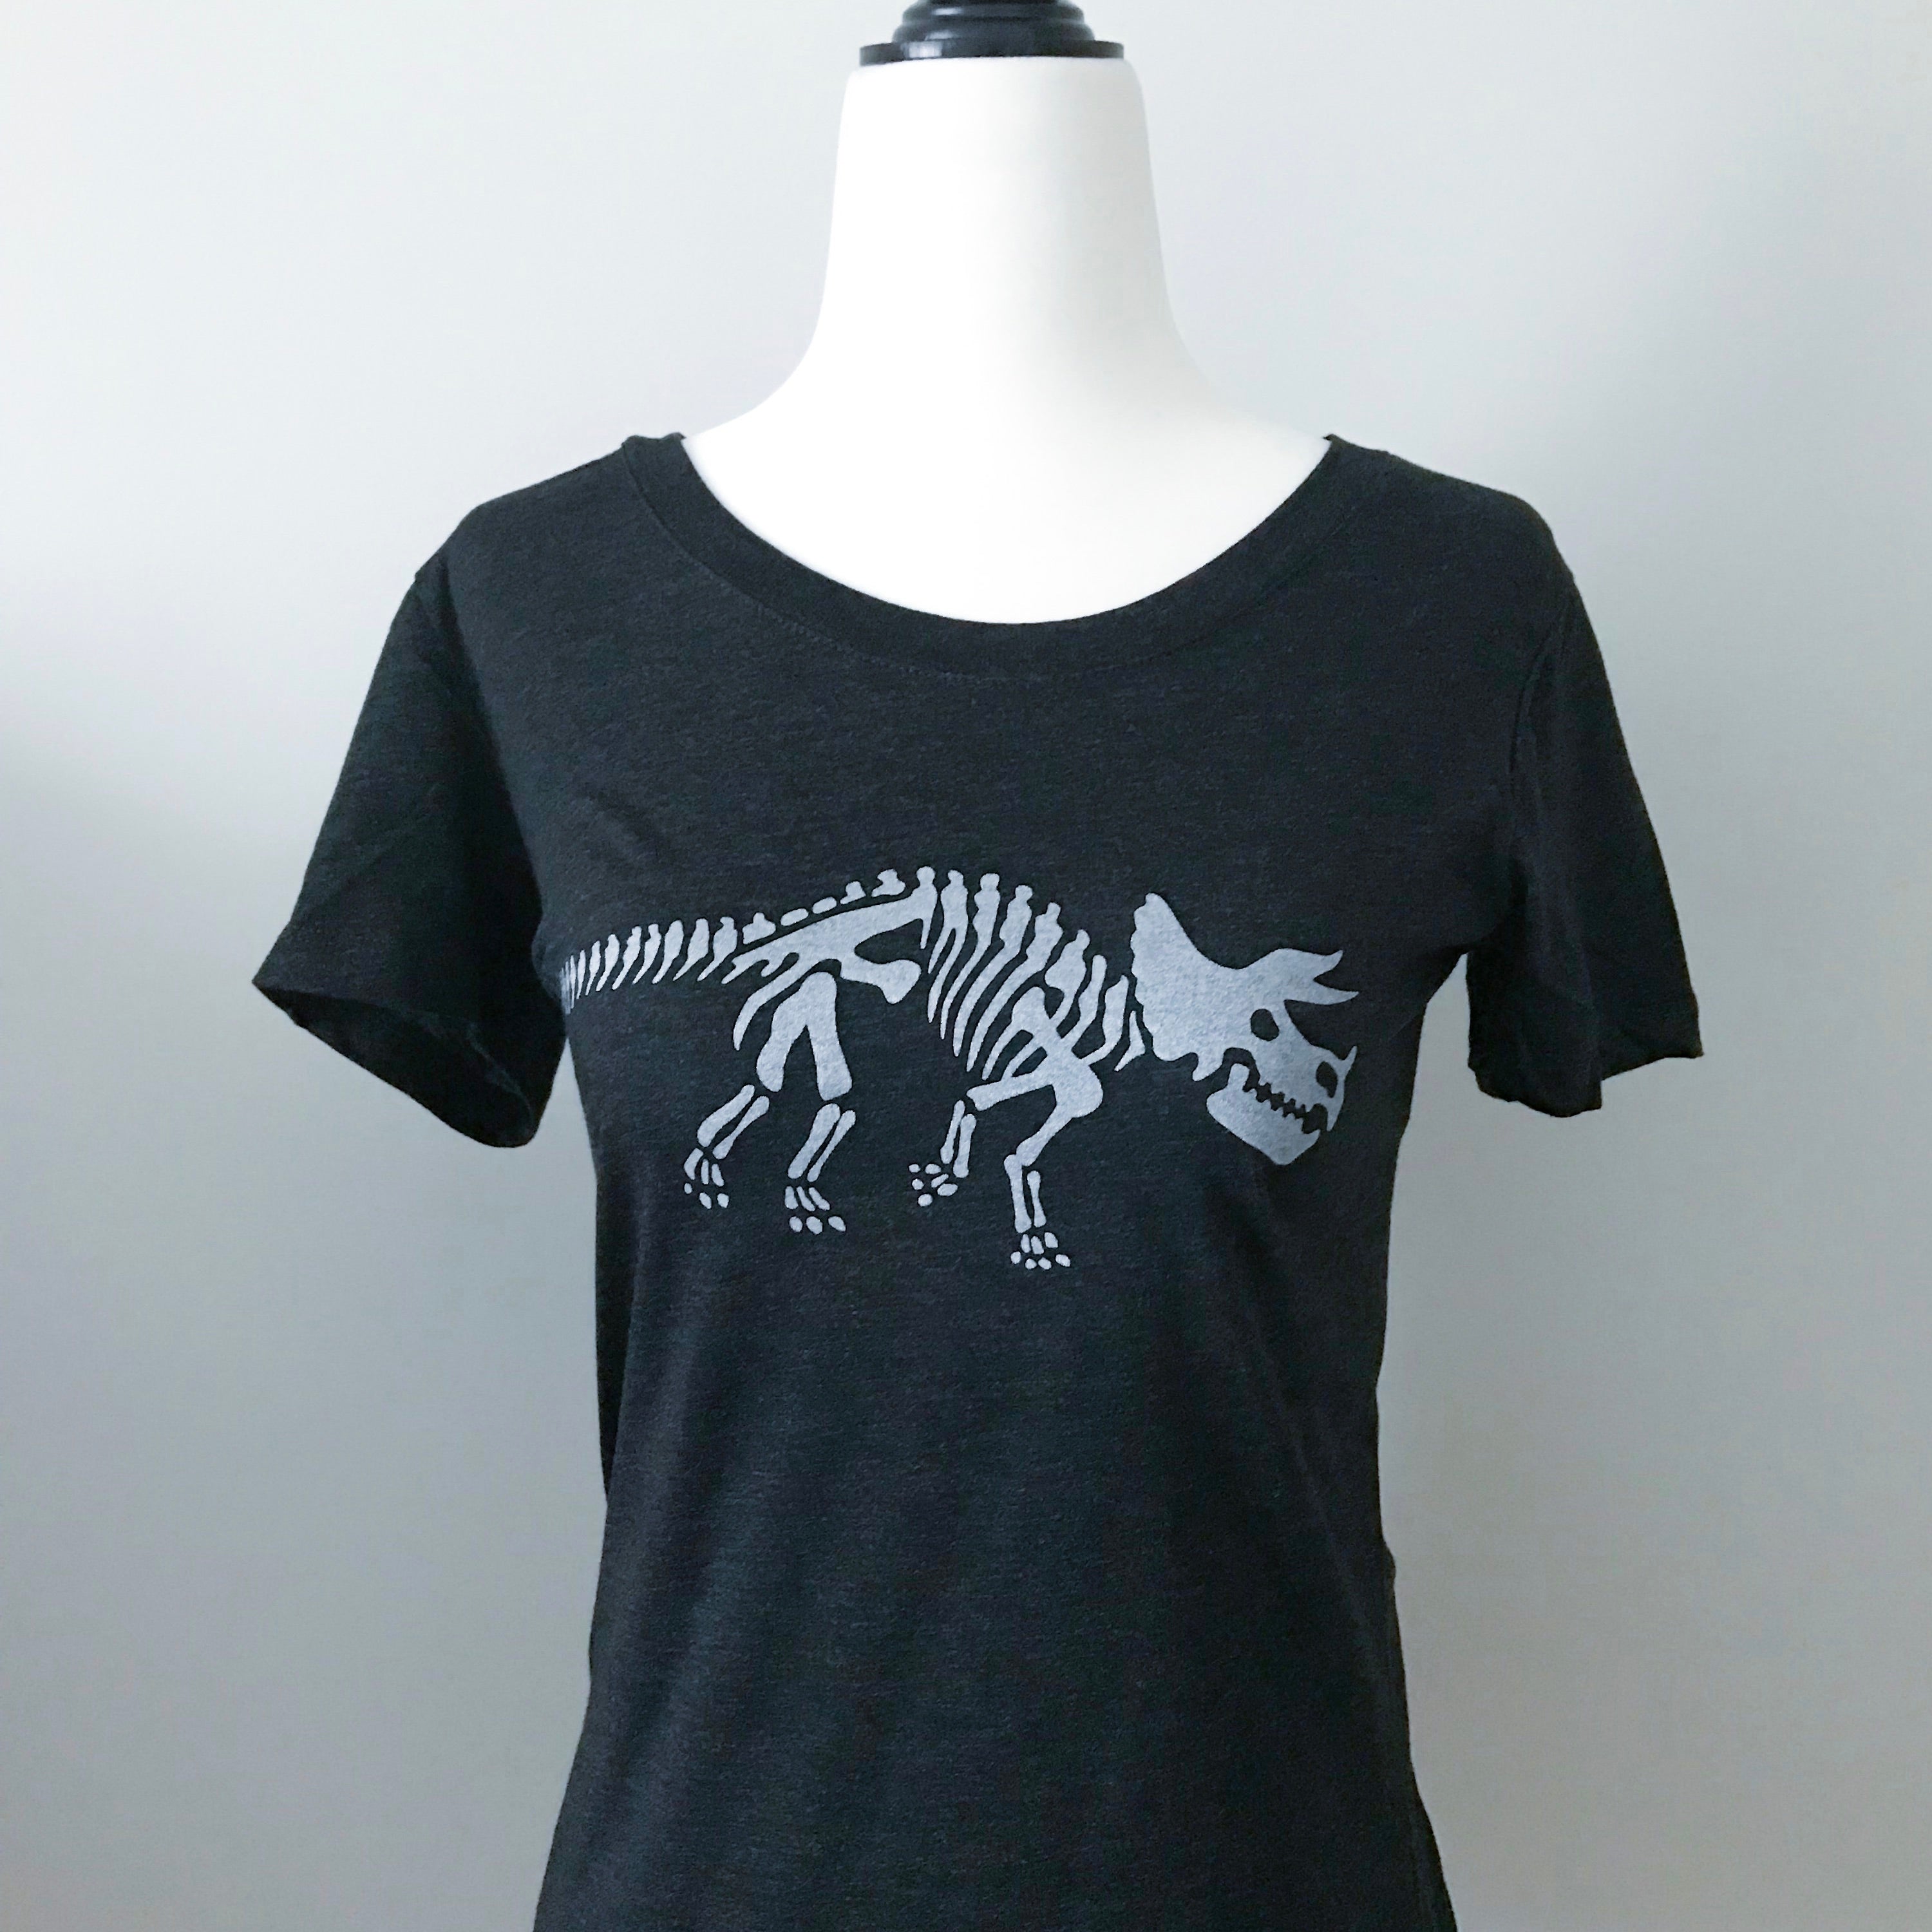 This short sleeved charcoal black t-shirt displays the skeleton of a triceratops dinosaur, printed in silver ink. 